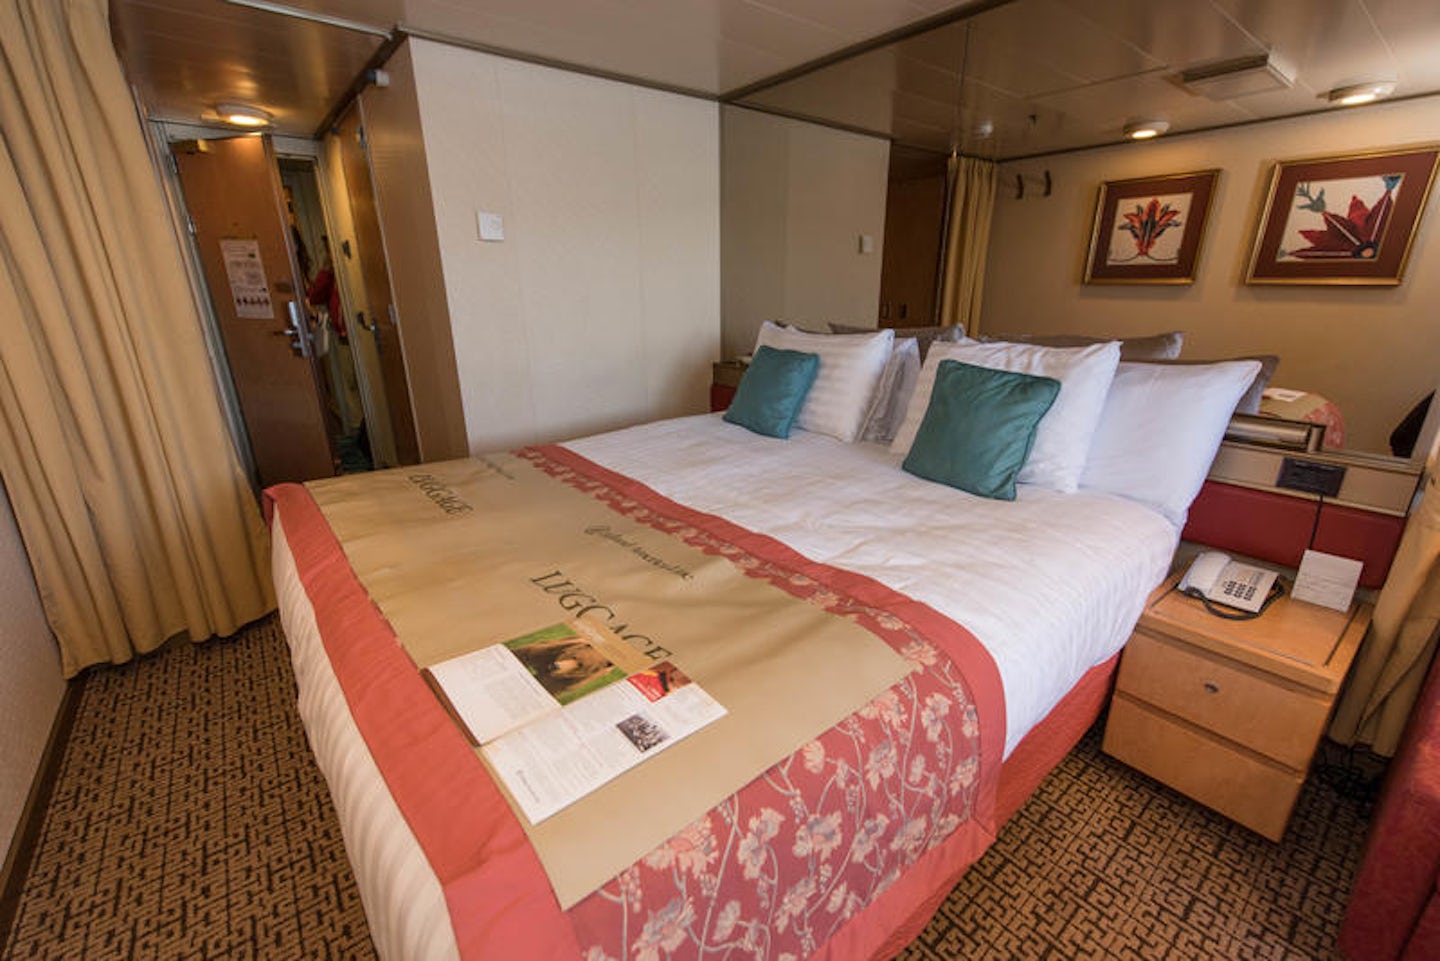 The Outside Cabin on Noordam